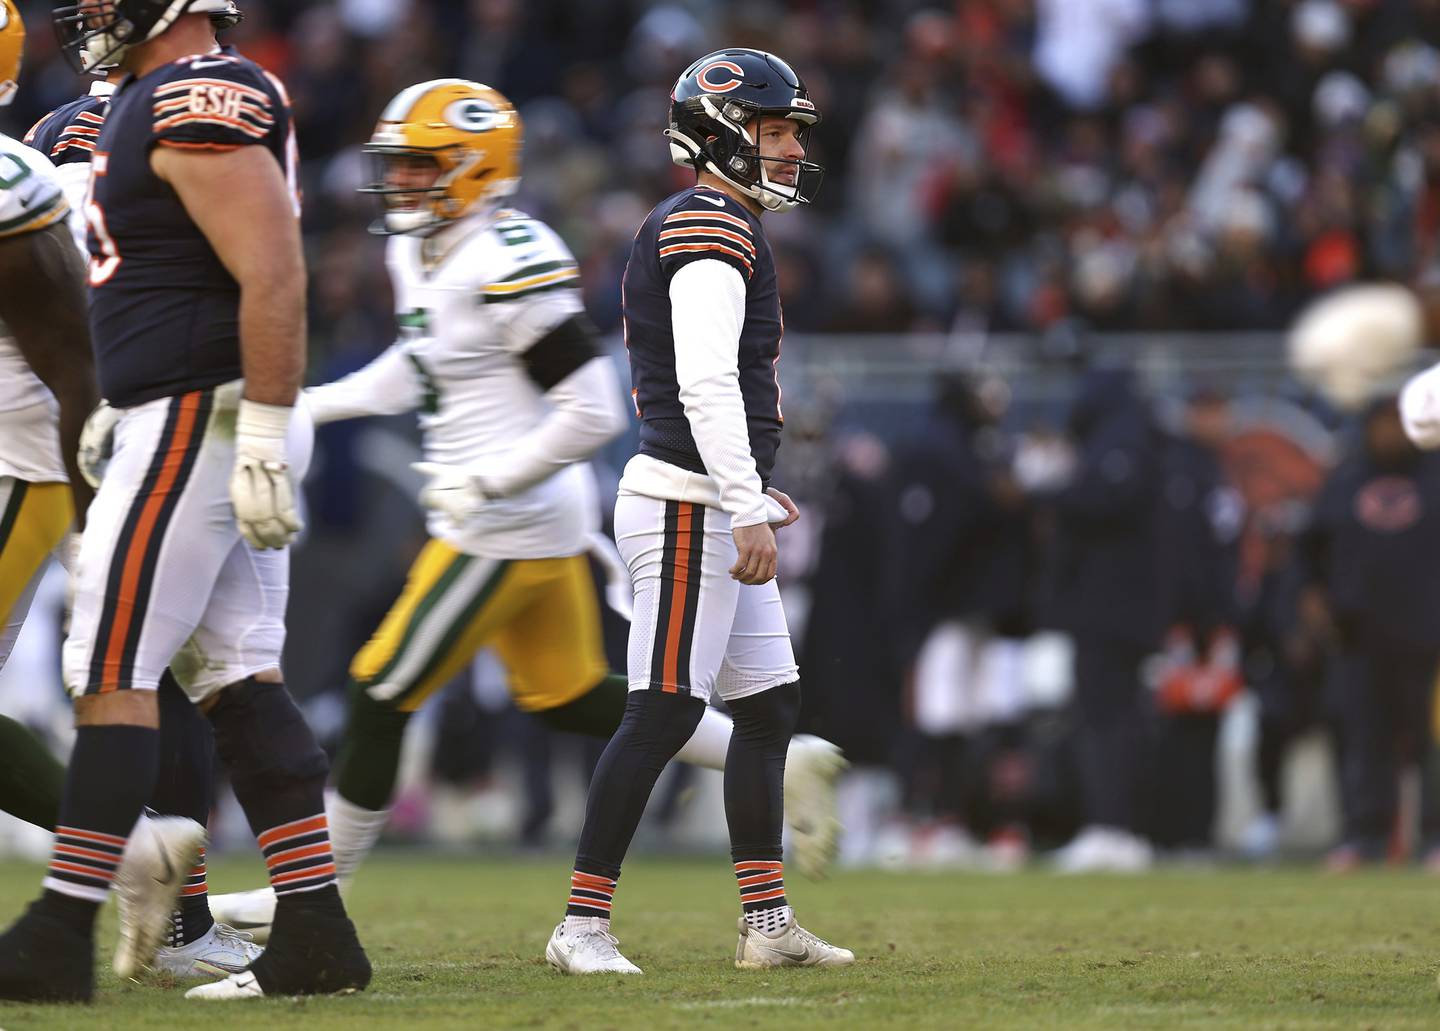 Bears kicker Cairo Santos stands on the field after missing a field-goal attempt against the Packers in the fourth quarter on Dec. 4 at Soldier Field. 